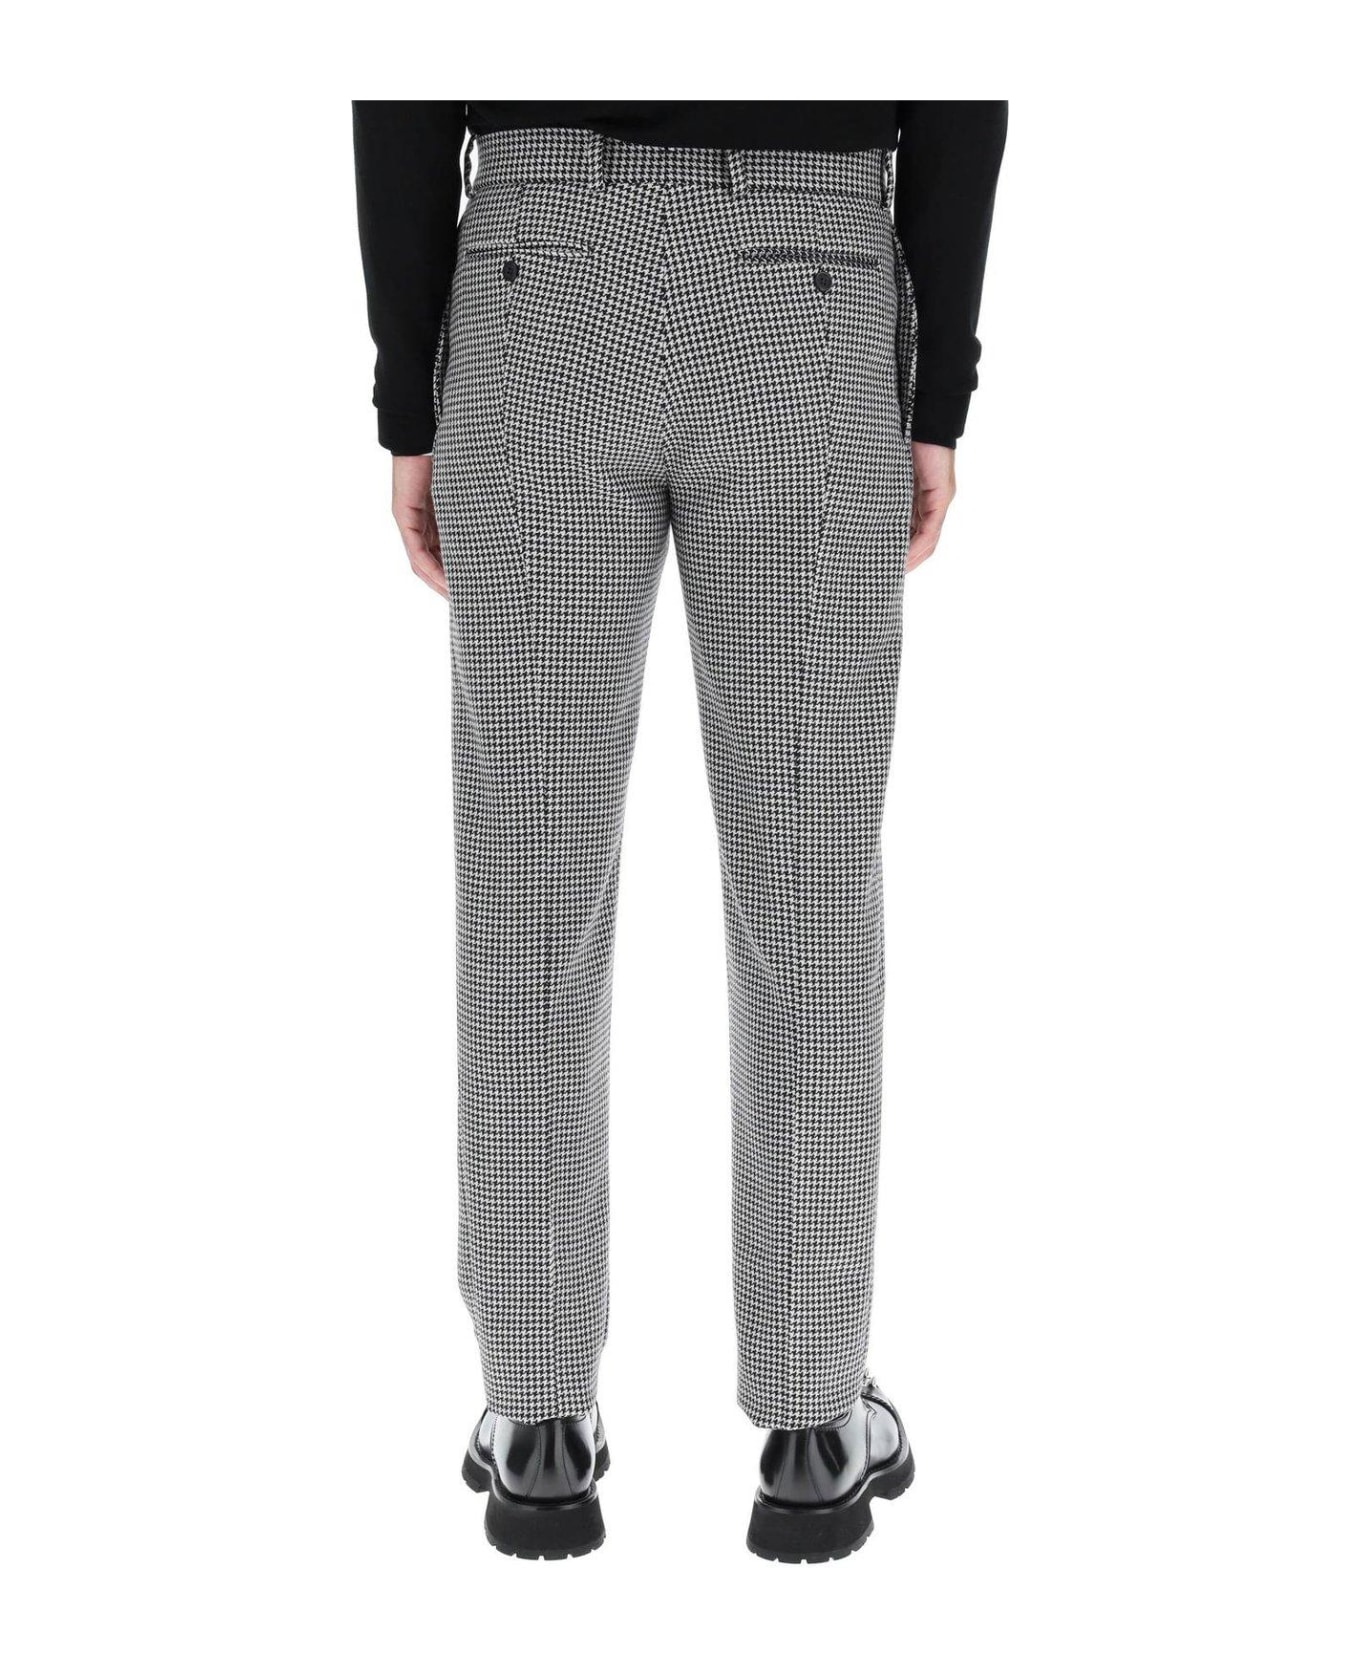 Alexander McQueen Houndstooth Pattern Tapered Trousers - Grigio